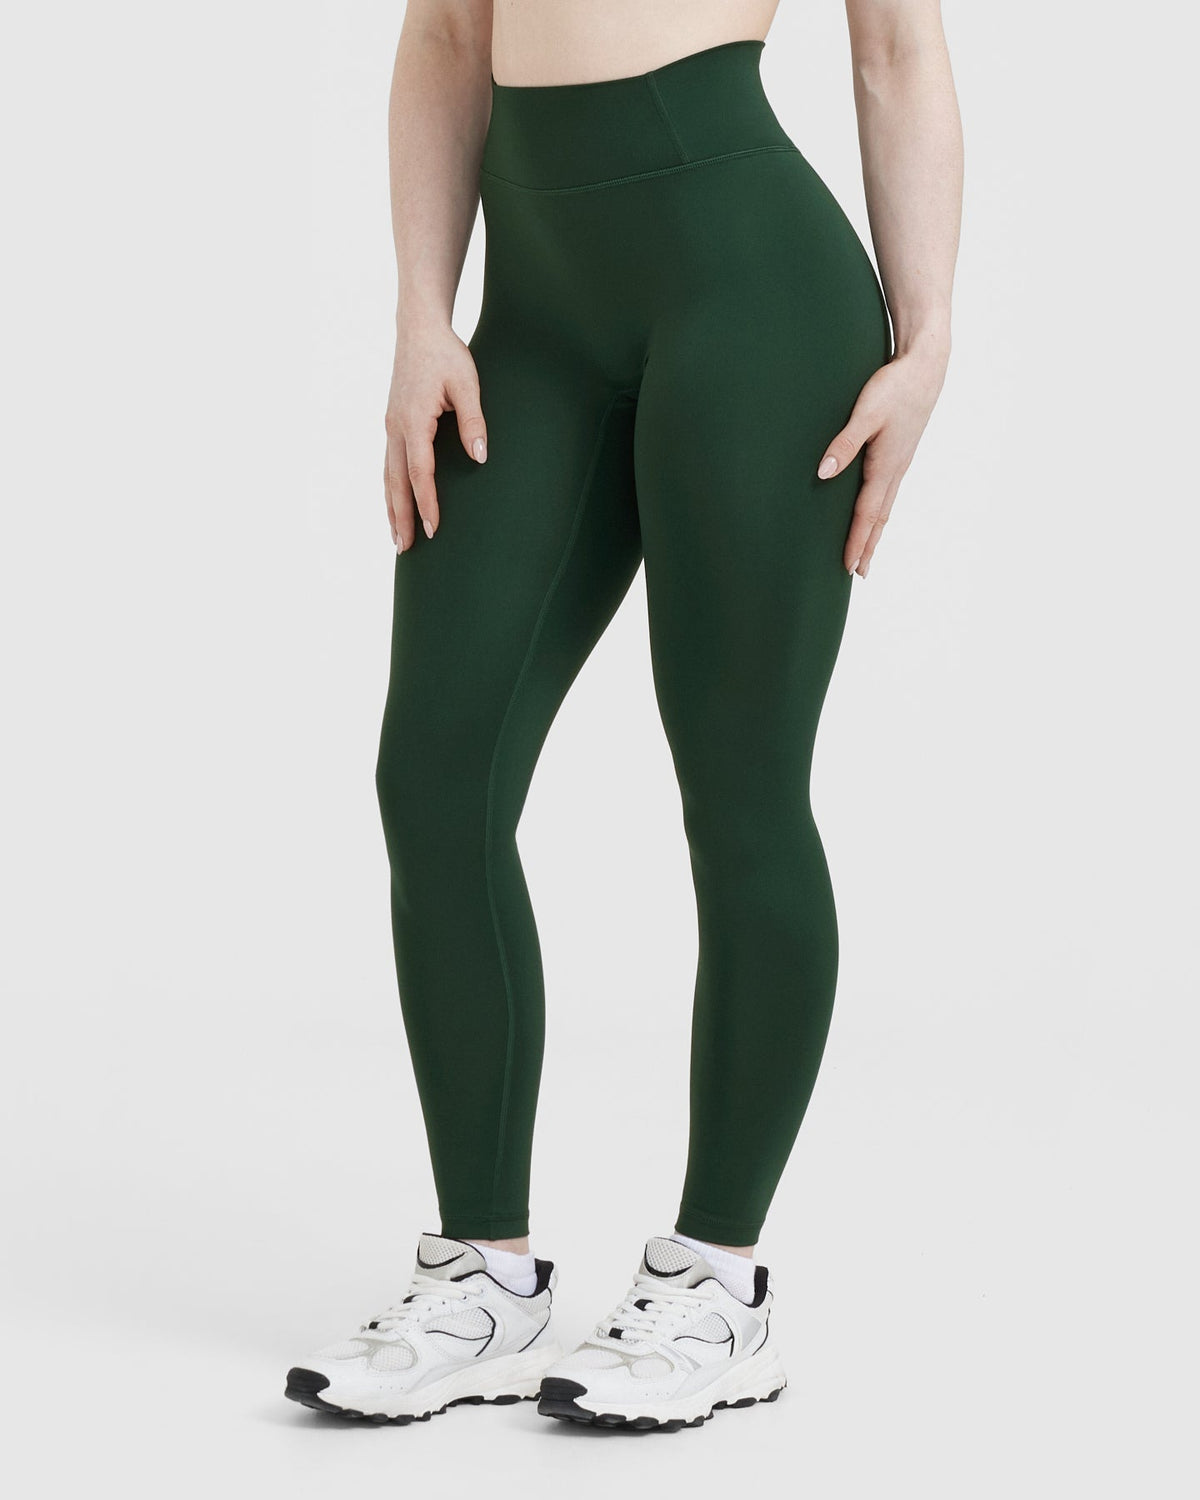 Sustainable Leggings From Europe - The Green Edition